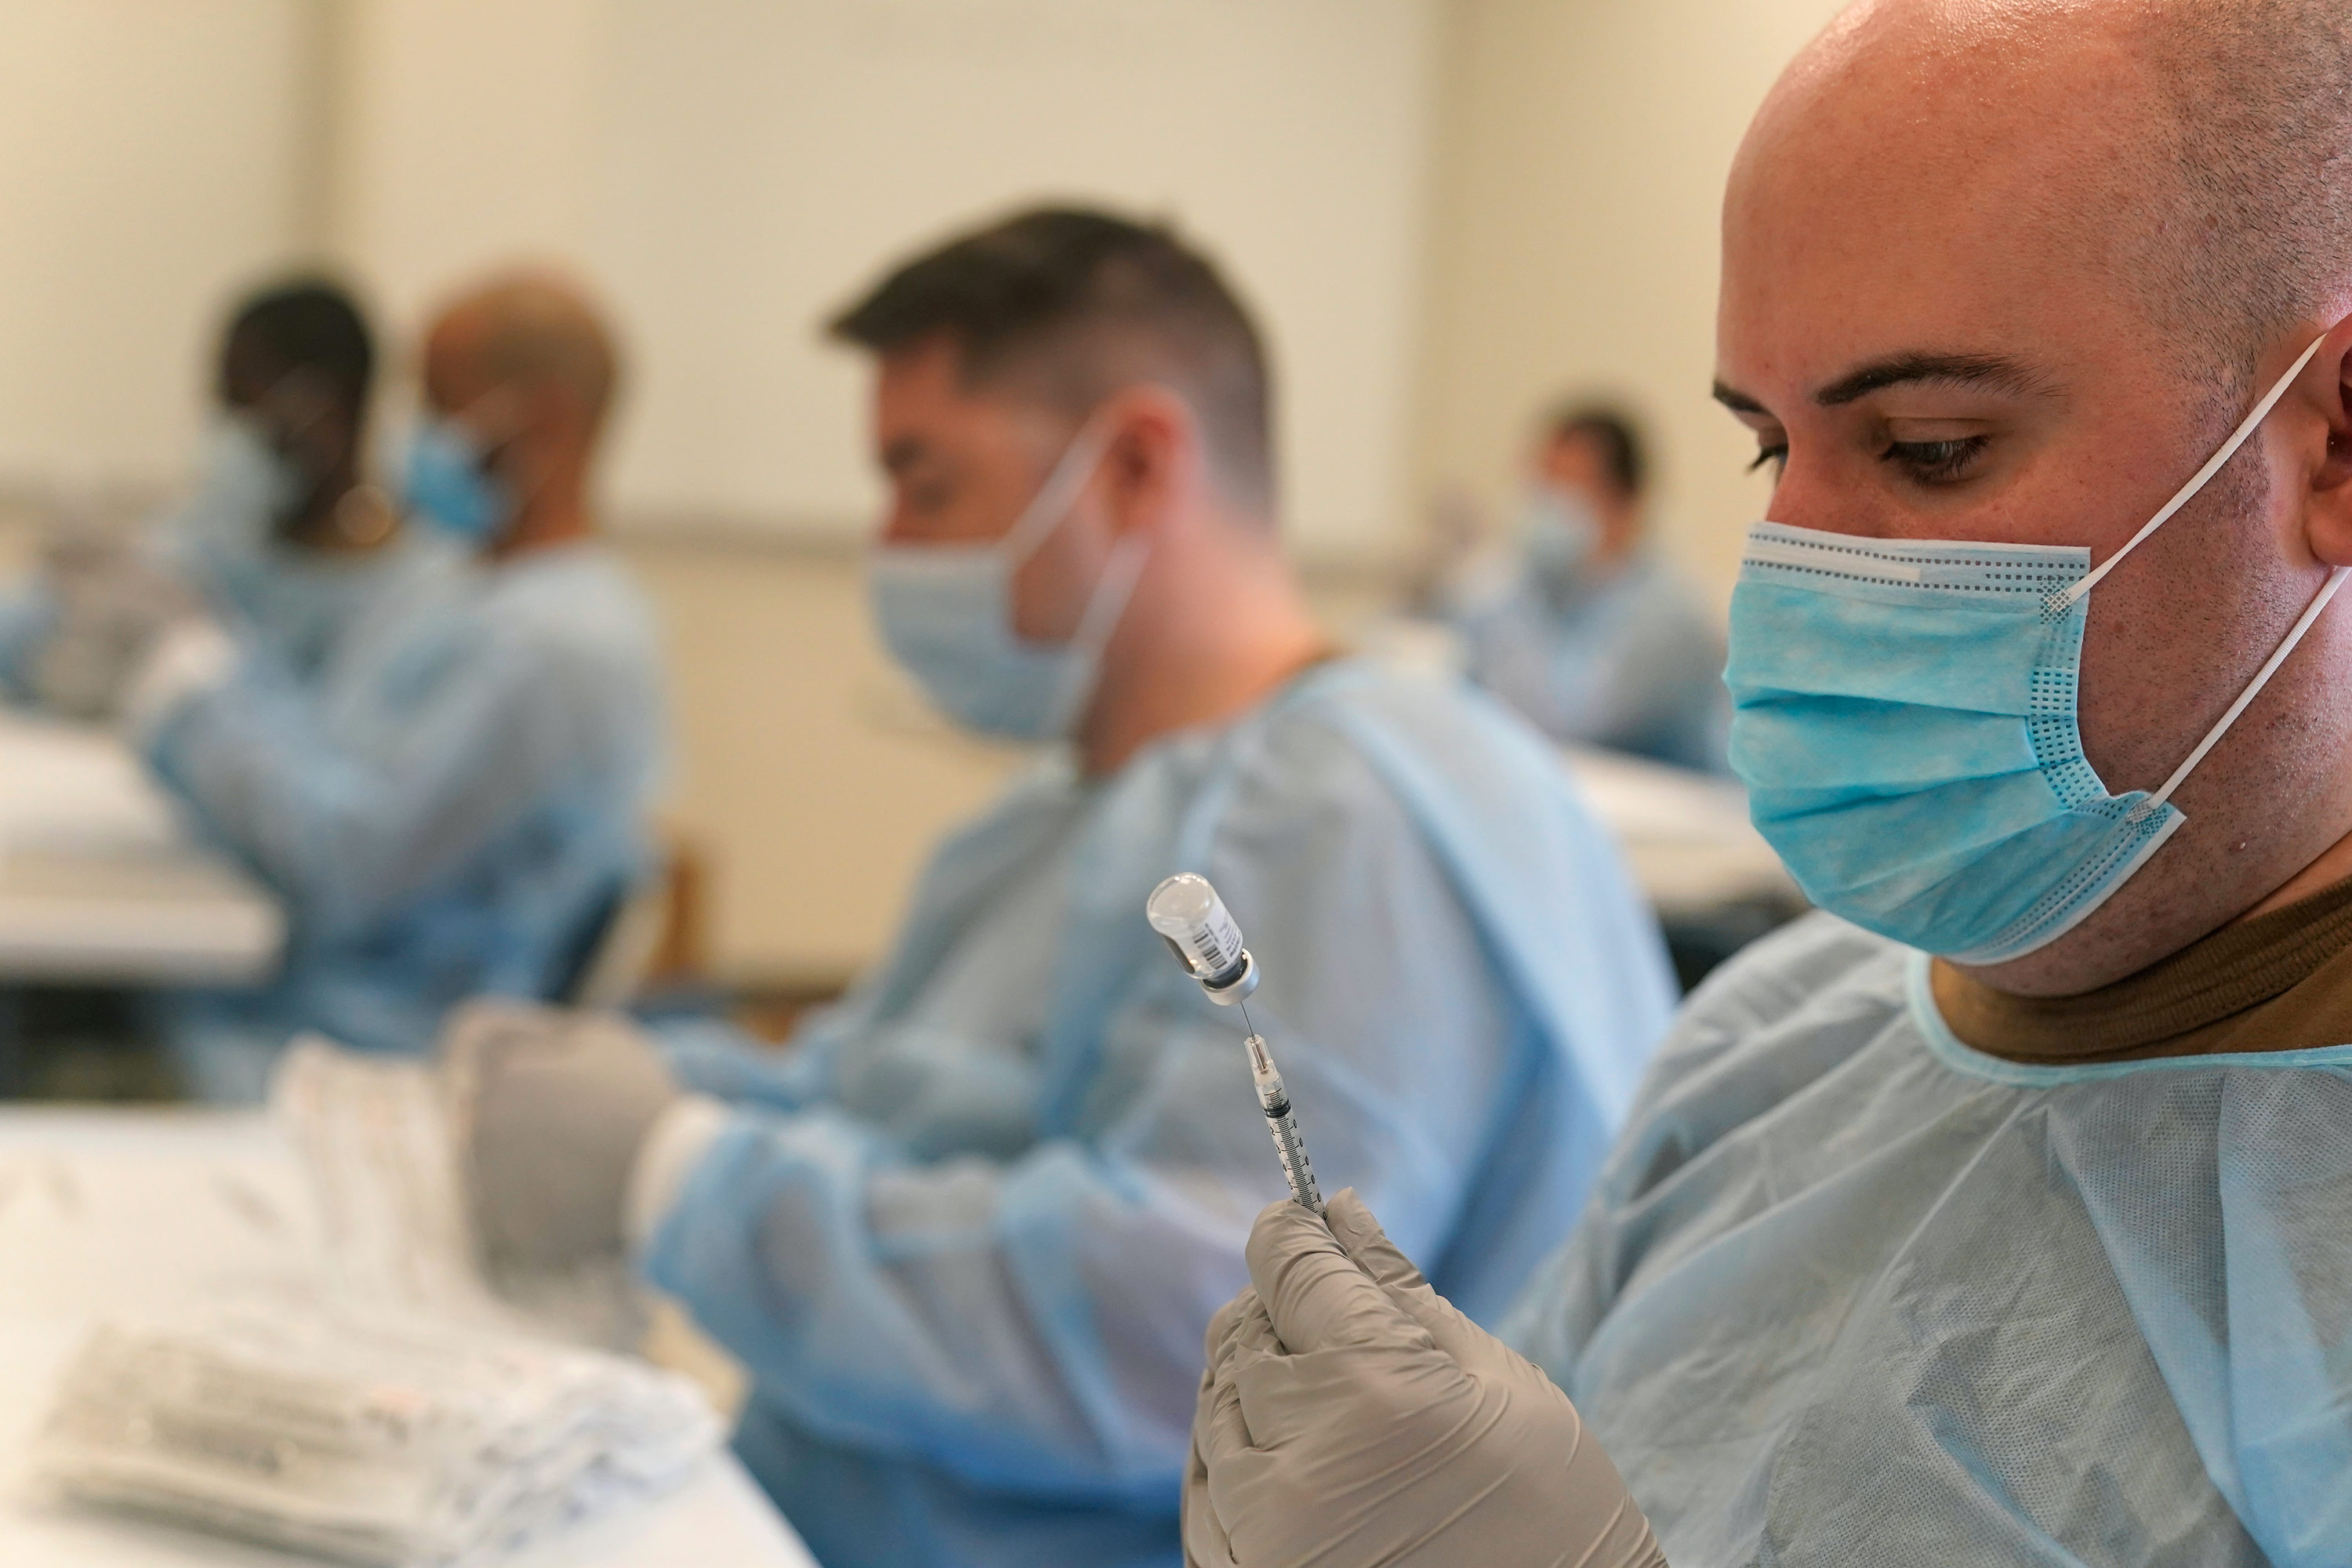 Navy personnel prepare doses of the Covid-19 vaccine at a mass vaccination site in New York, on February 24. 